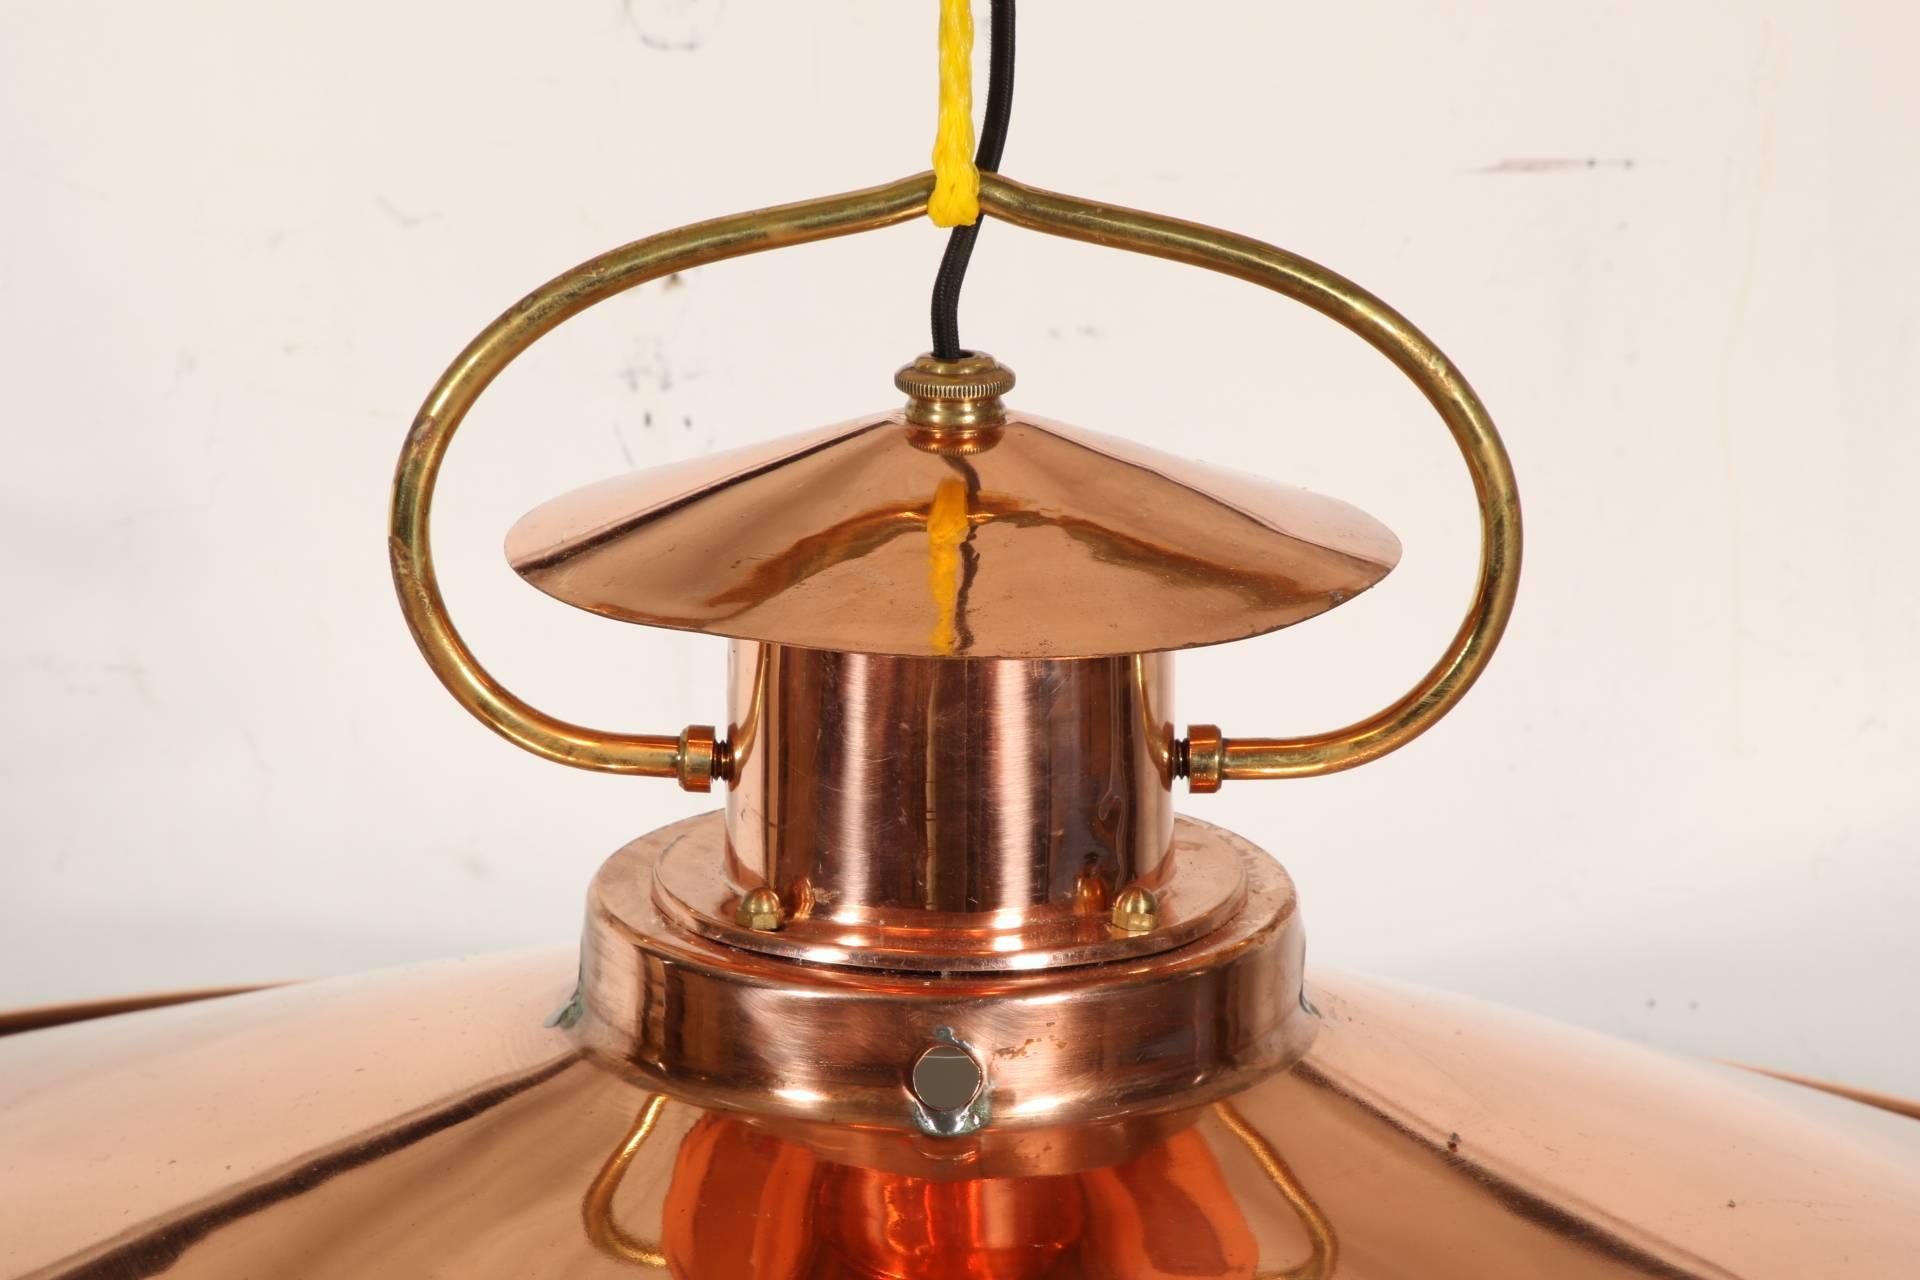 Single light copper disk with a lantern form top and a brass top suspension attachment.
Condition: some losses to finish and holes around the lantern base.